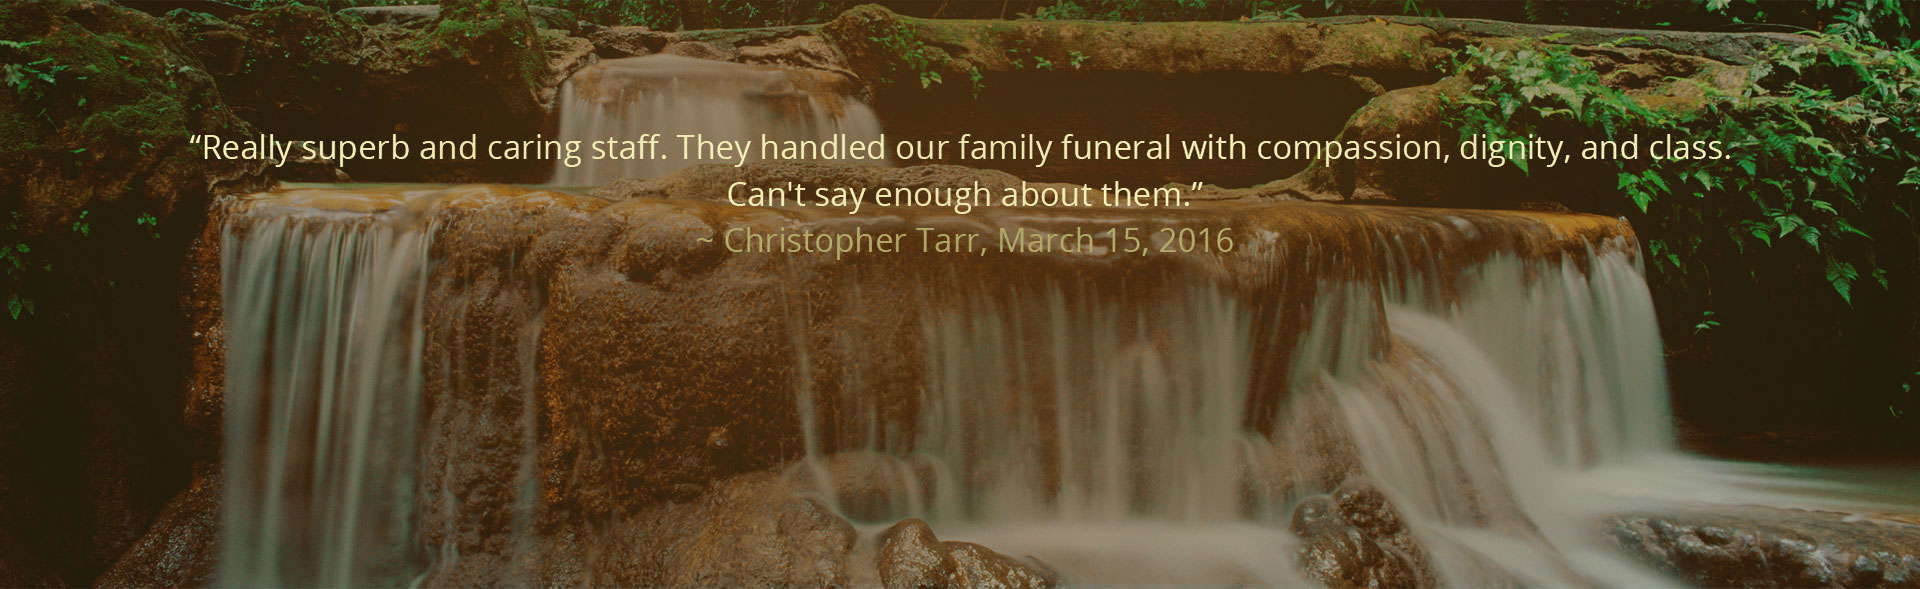 fred c dames funeral homes